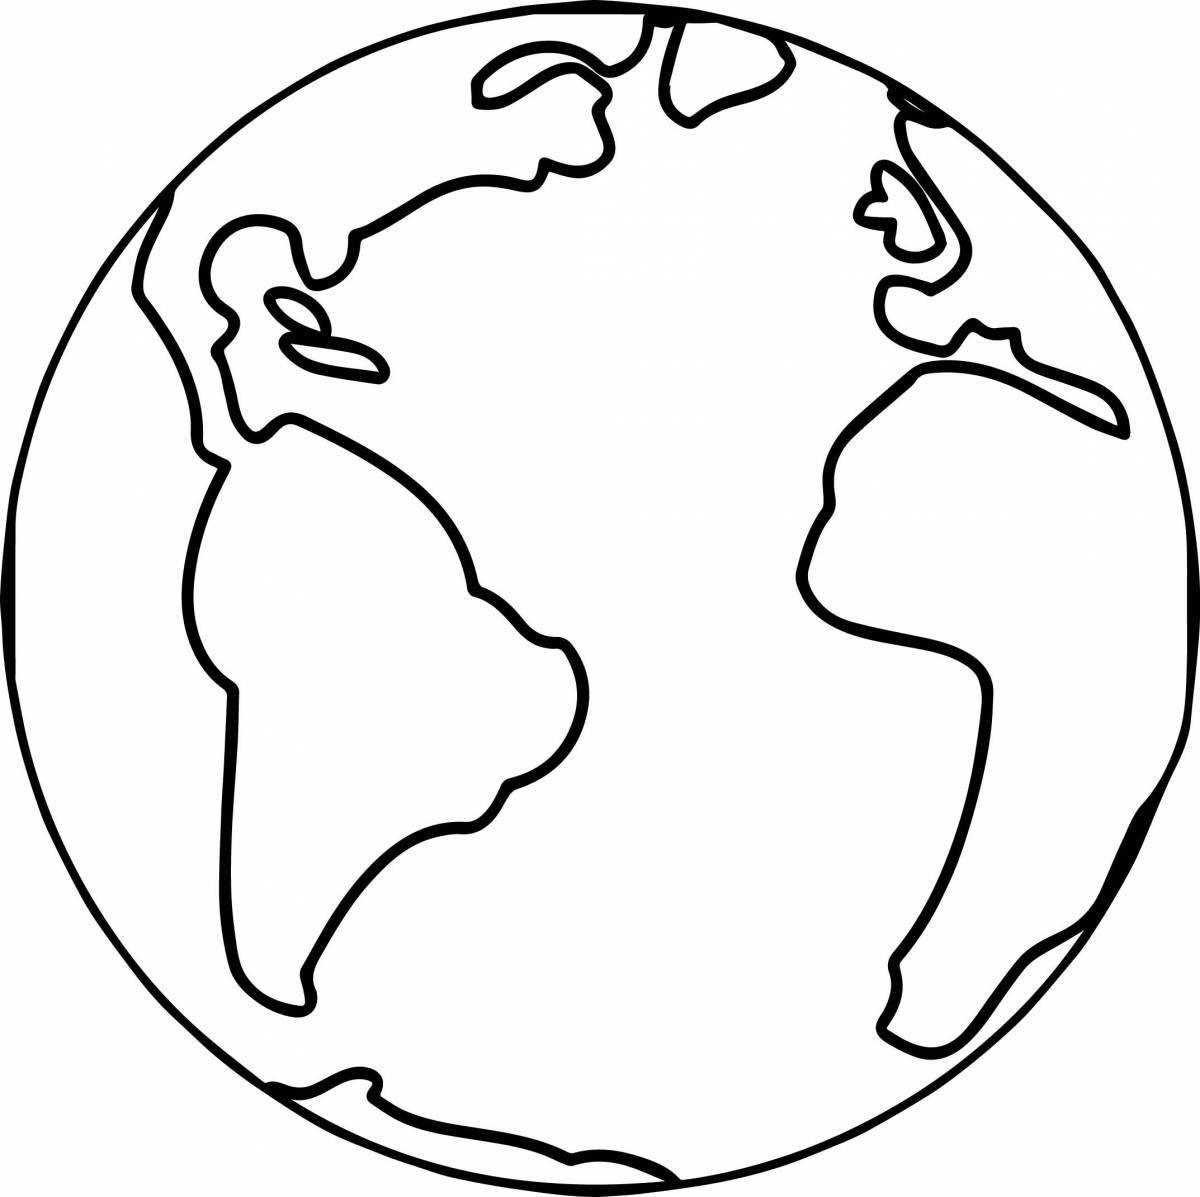 Coloring page grandiose world on earth